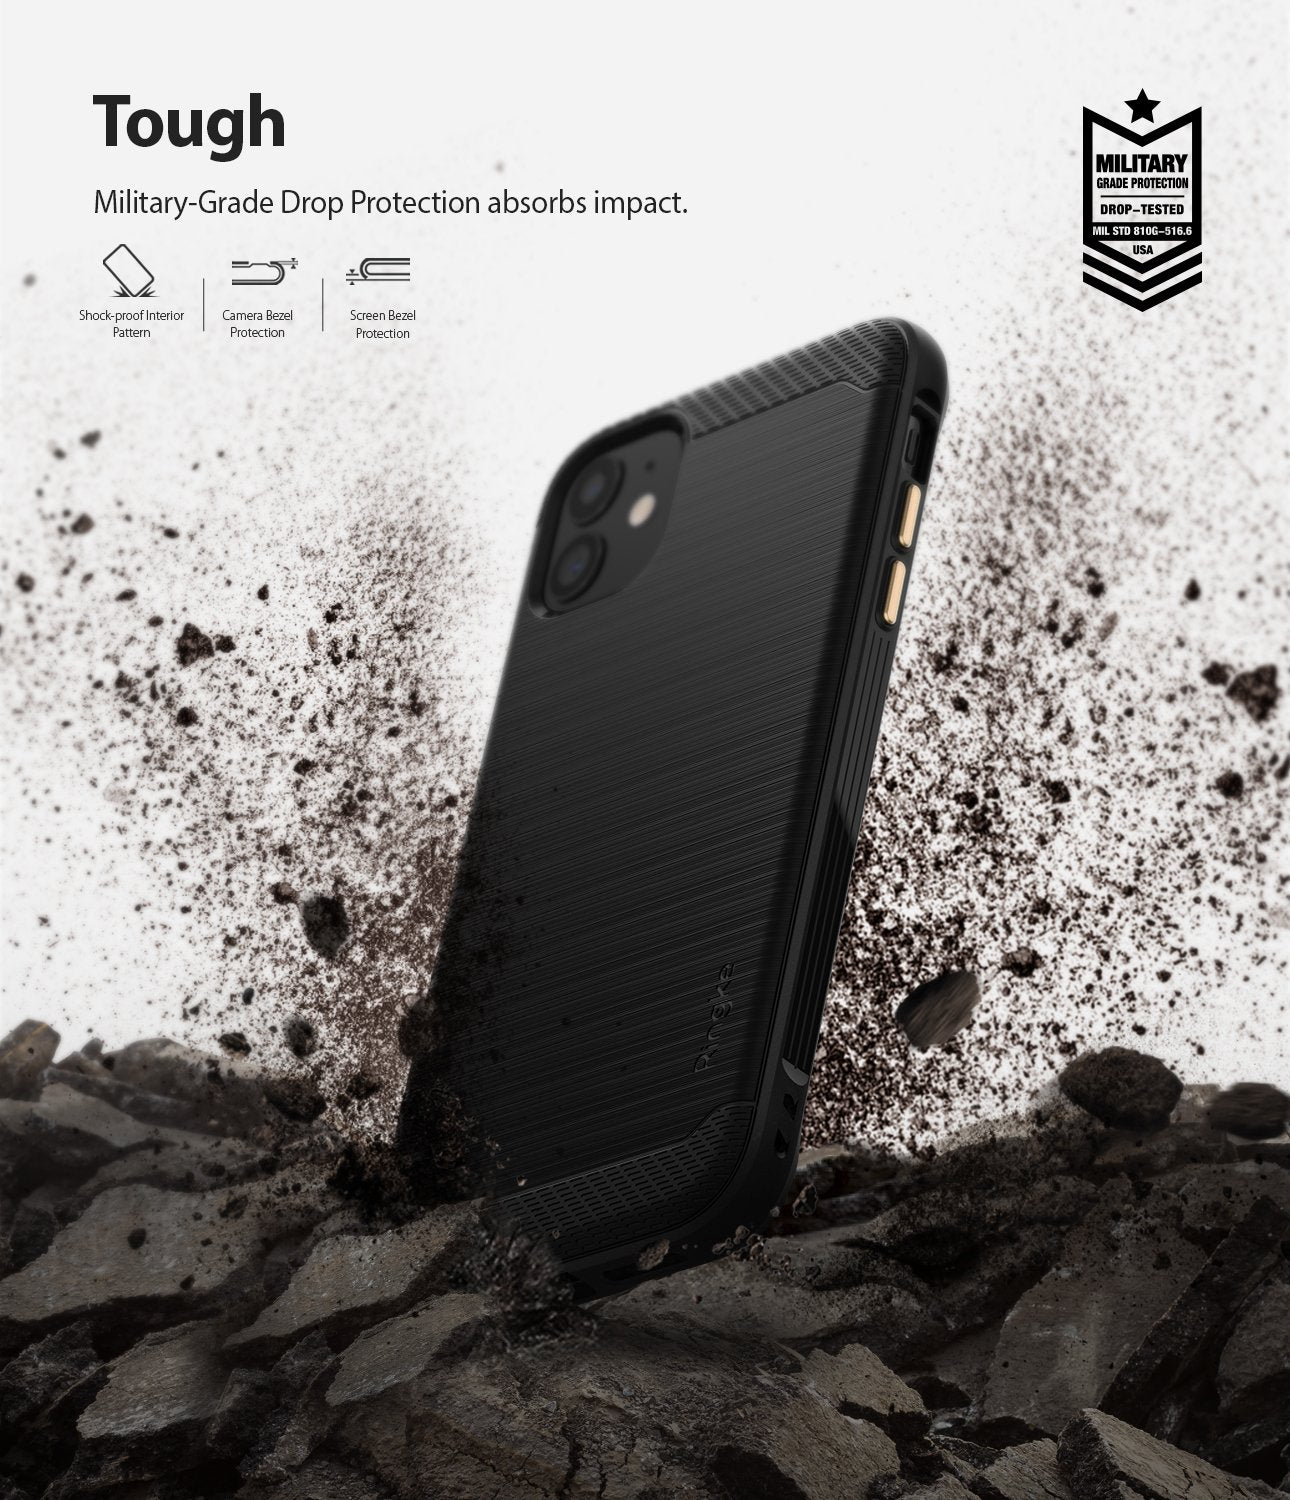 Ringke Onyx designed for iPhone 11 Black Tough Drop Protection